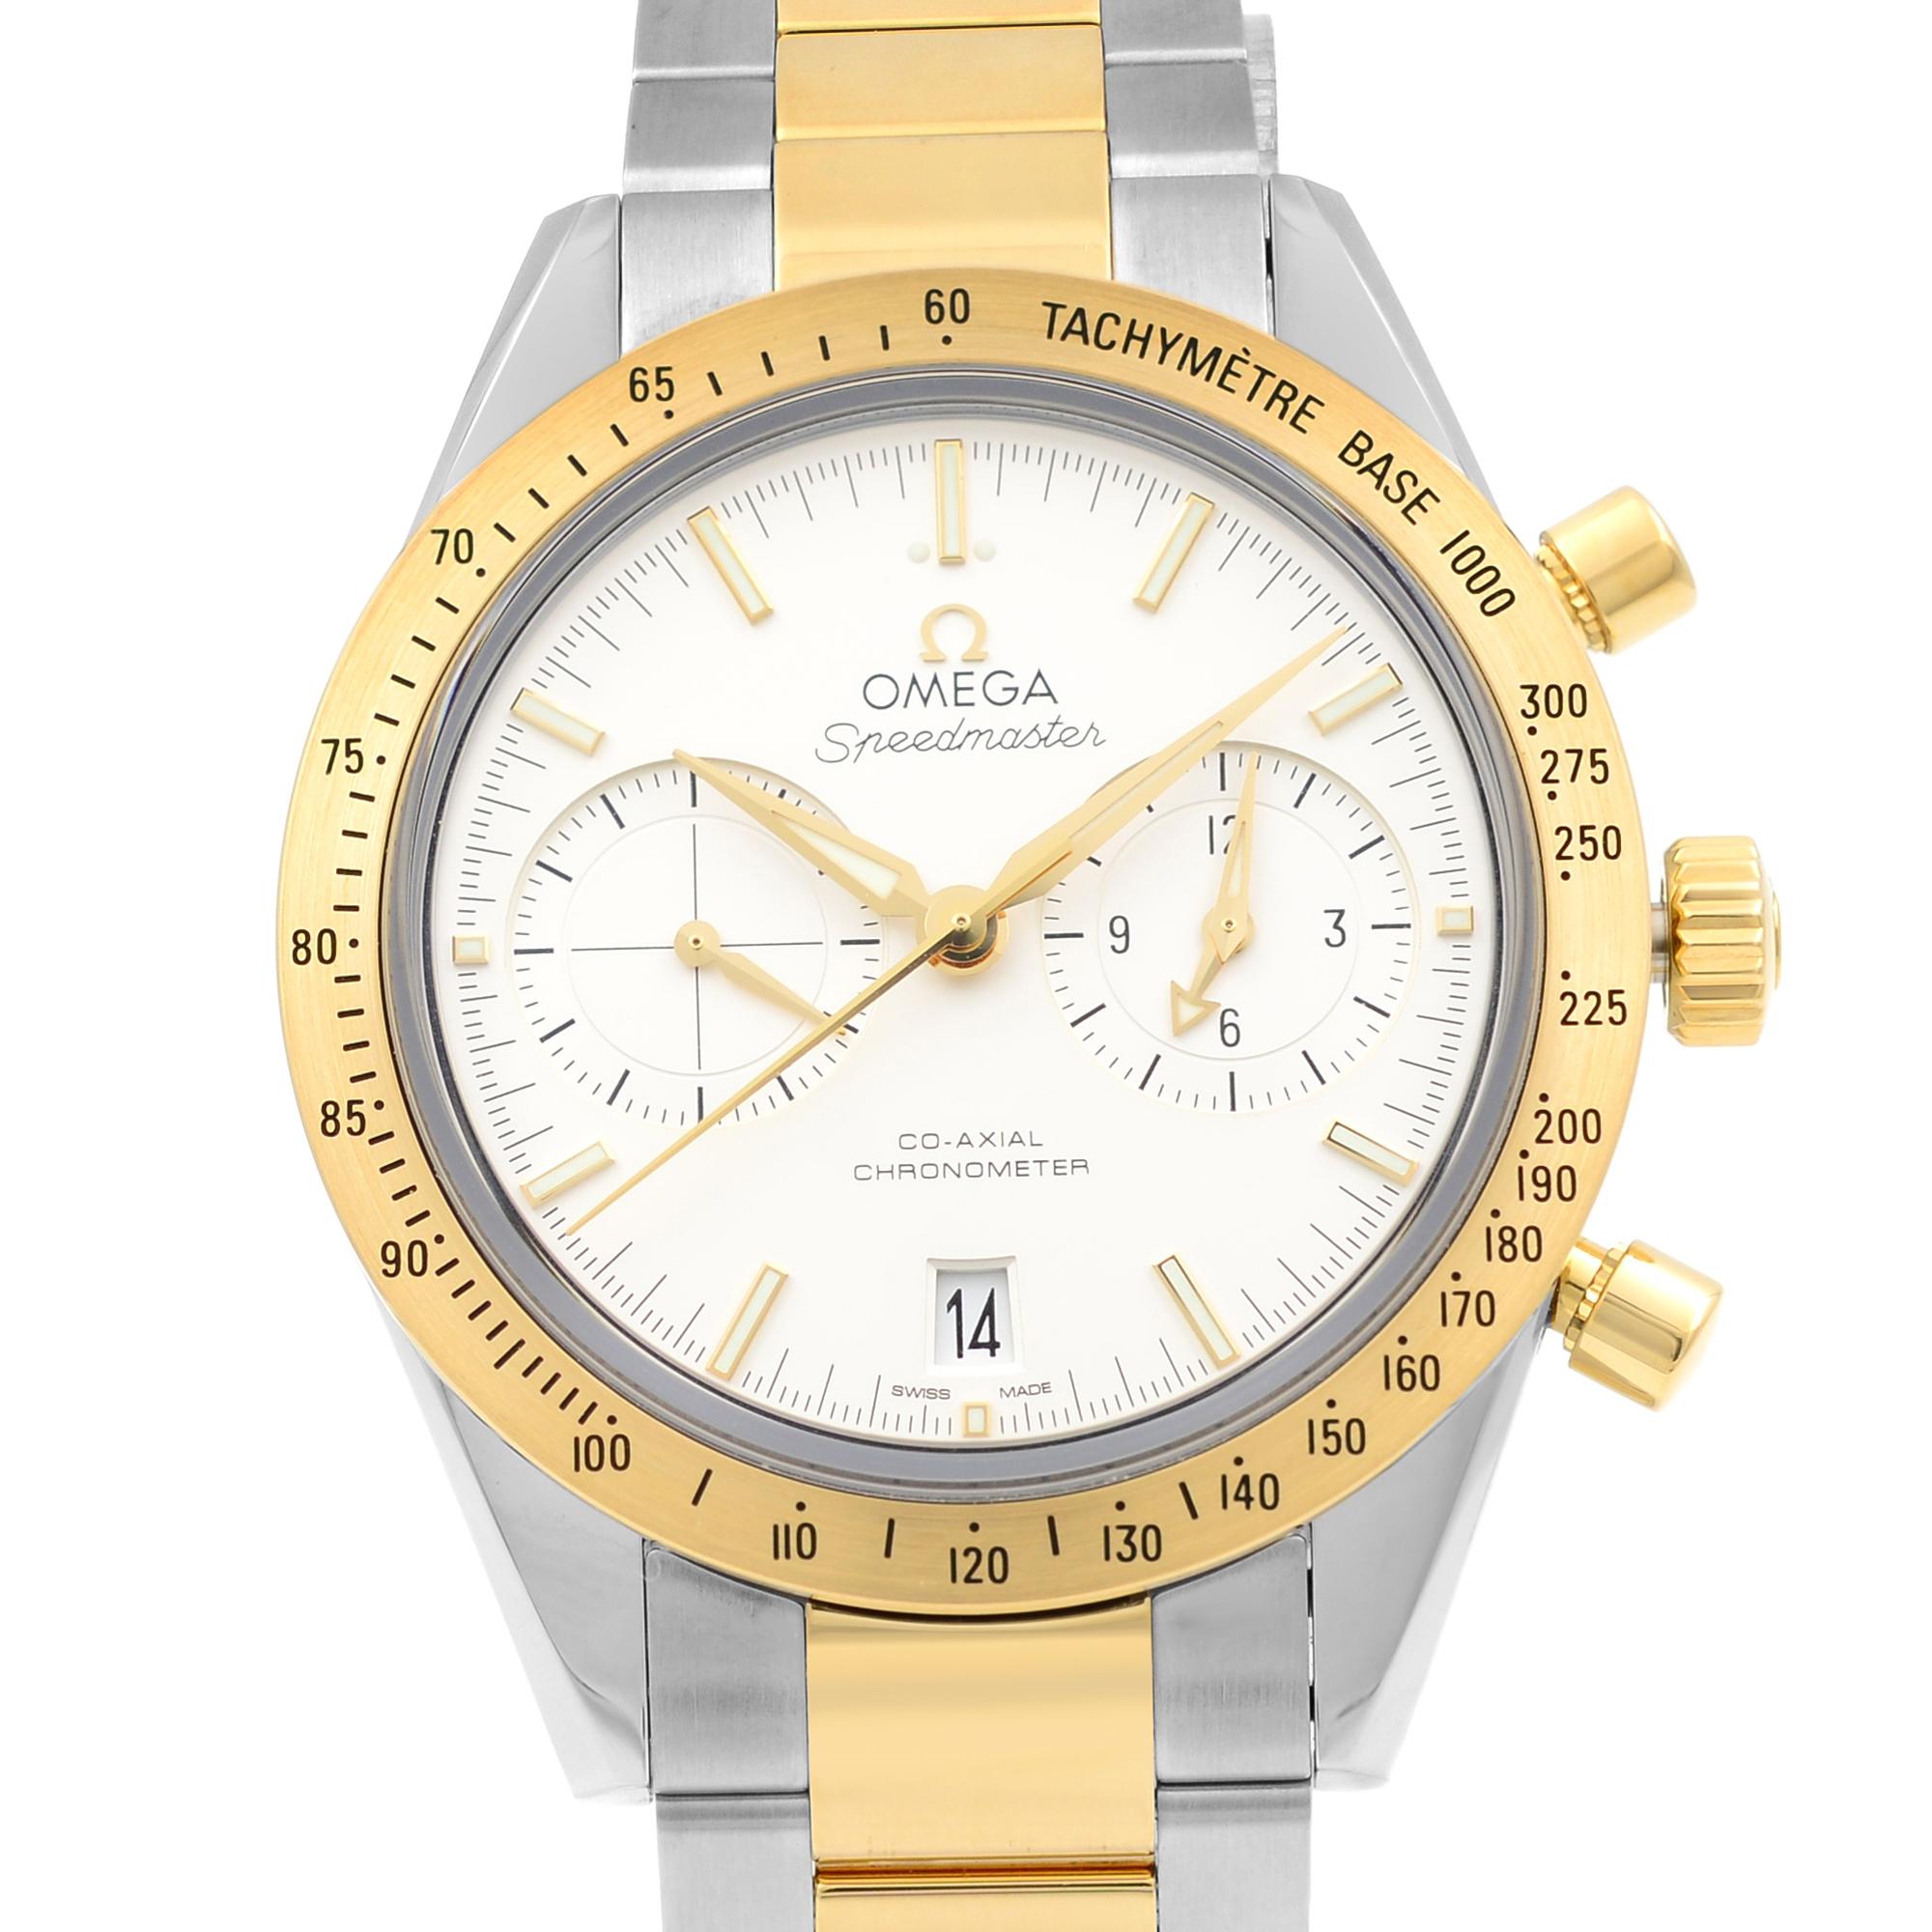 Display Model Omega Speedmaster 18k Yellow Gold Steel Automatic Men's Watch 331.20.42.51.02.001. This Beautiful Timepiece Features: Stainless Steel Case with a Stainless Steel Bracelet with 18k Yellow Gold Center Links, Fixed 18k Yellow Gold Bezel